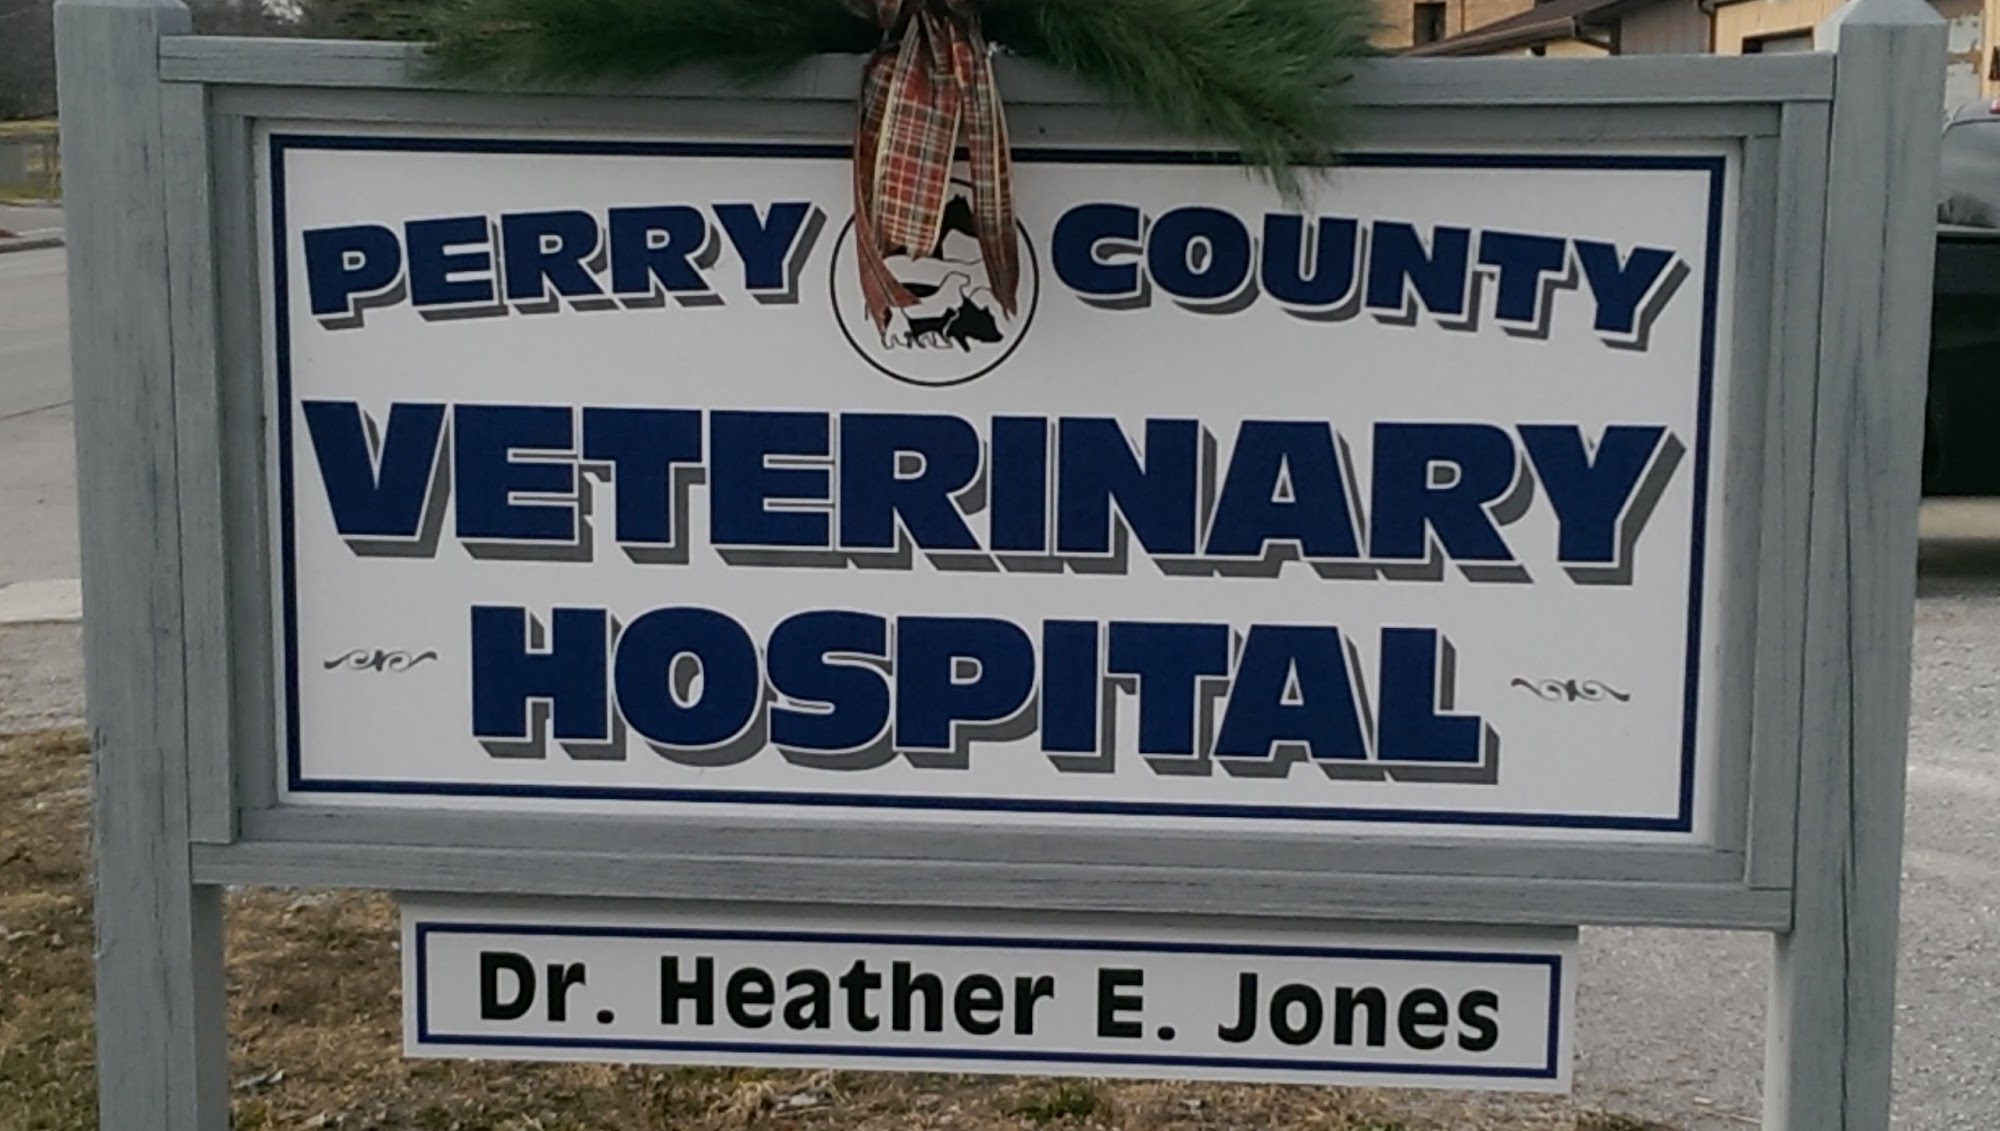 Perry County Veterinary Hospital 908 S Kingshighway, Perryville Missouri 63775